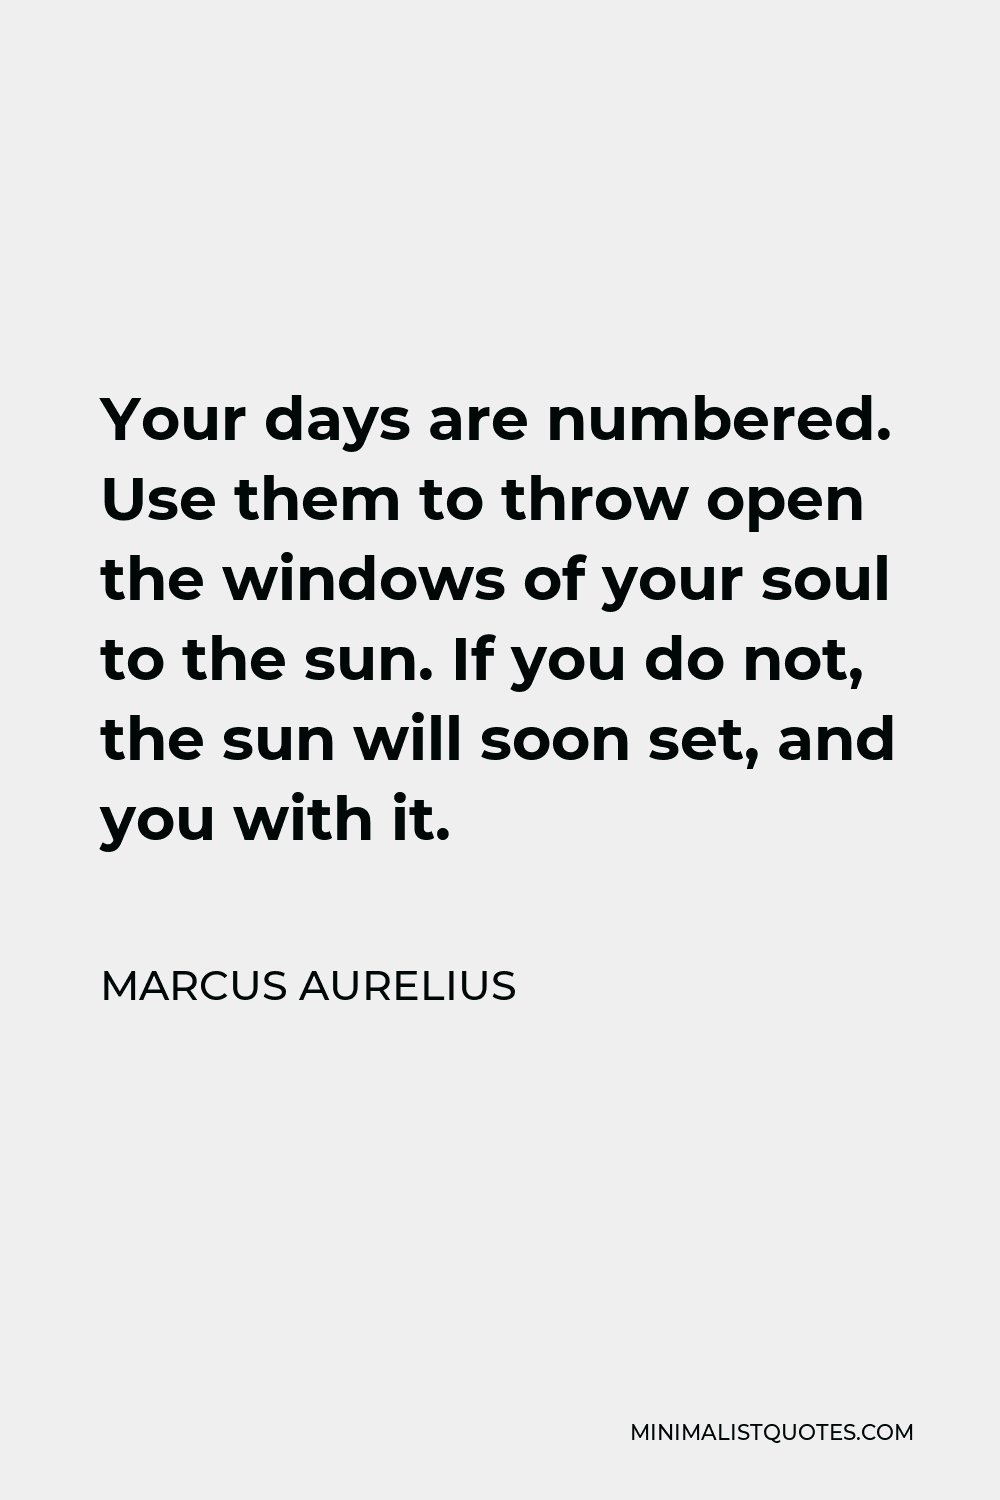 Marcus Aurelius Quote - Your days are numbered. Use them to throw open the windows of your soul to the sun. If you do not, the sun will soon set, and you with it.